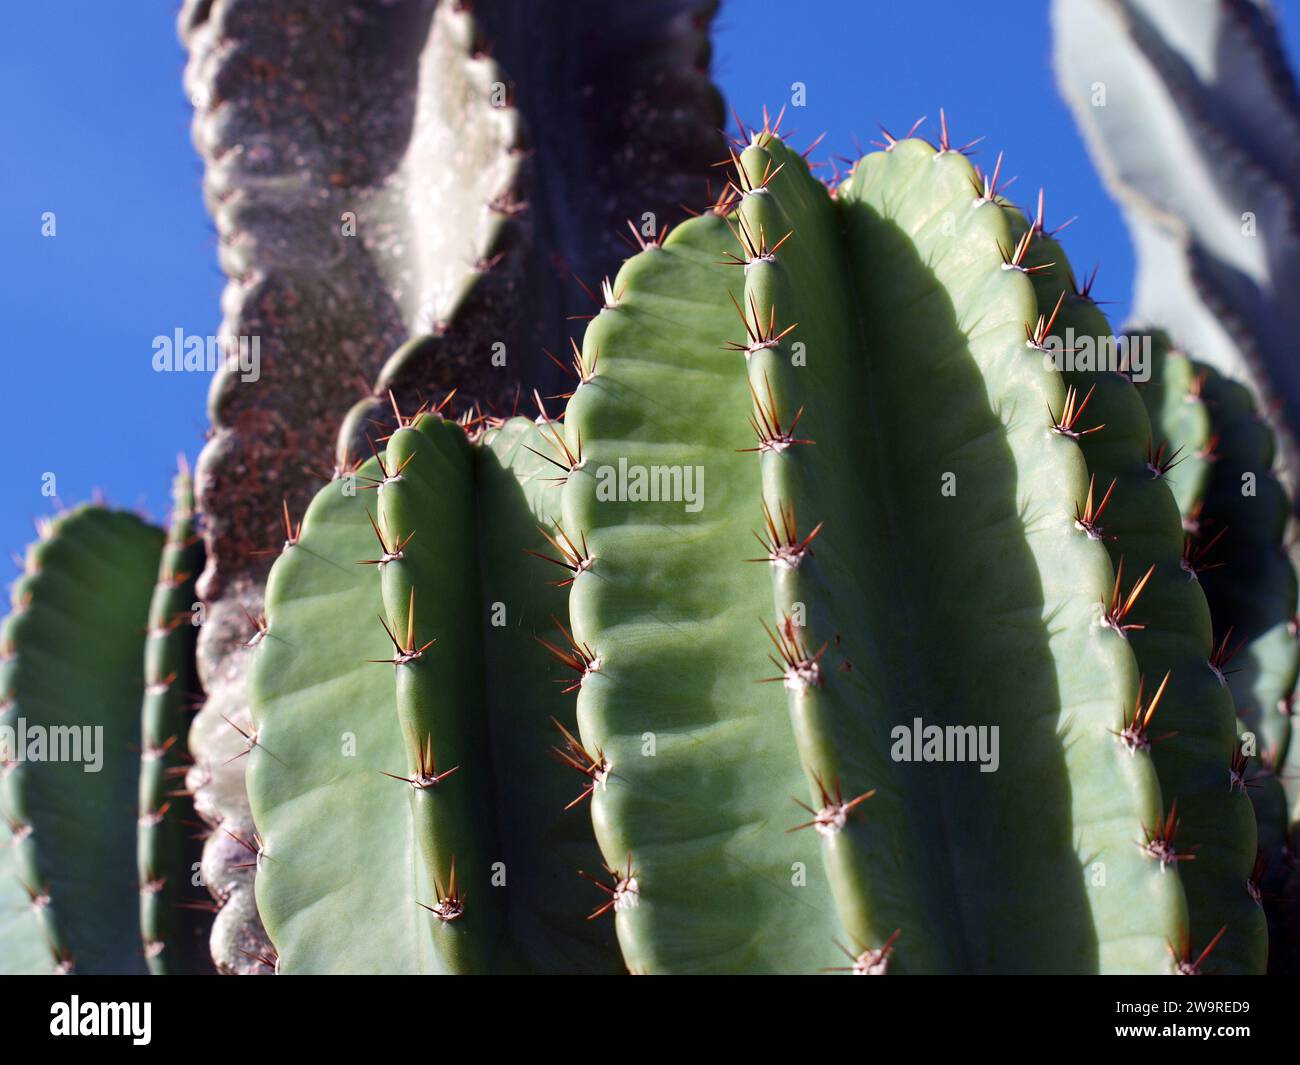 Close up of a cactus plant. Details of the spines. Stock Photo